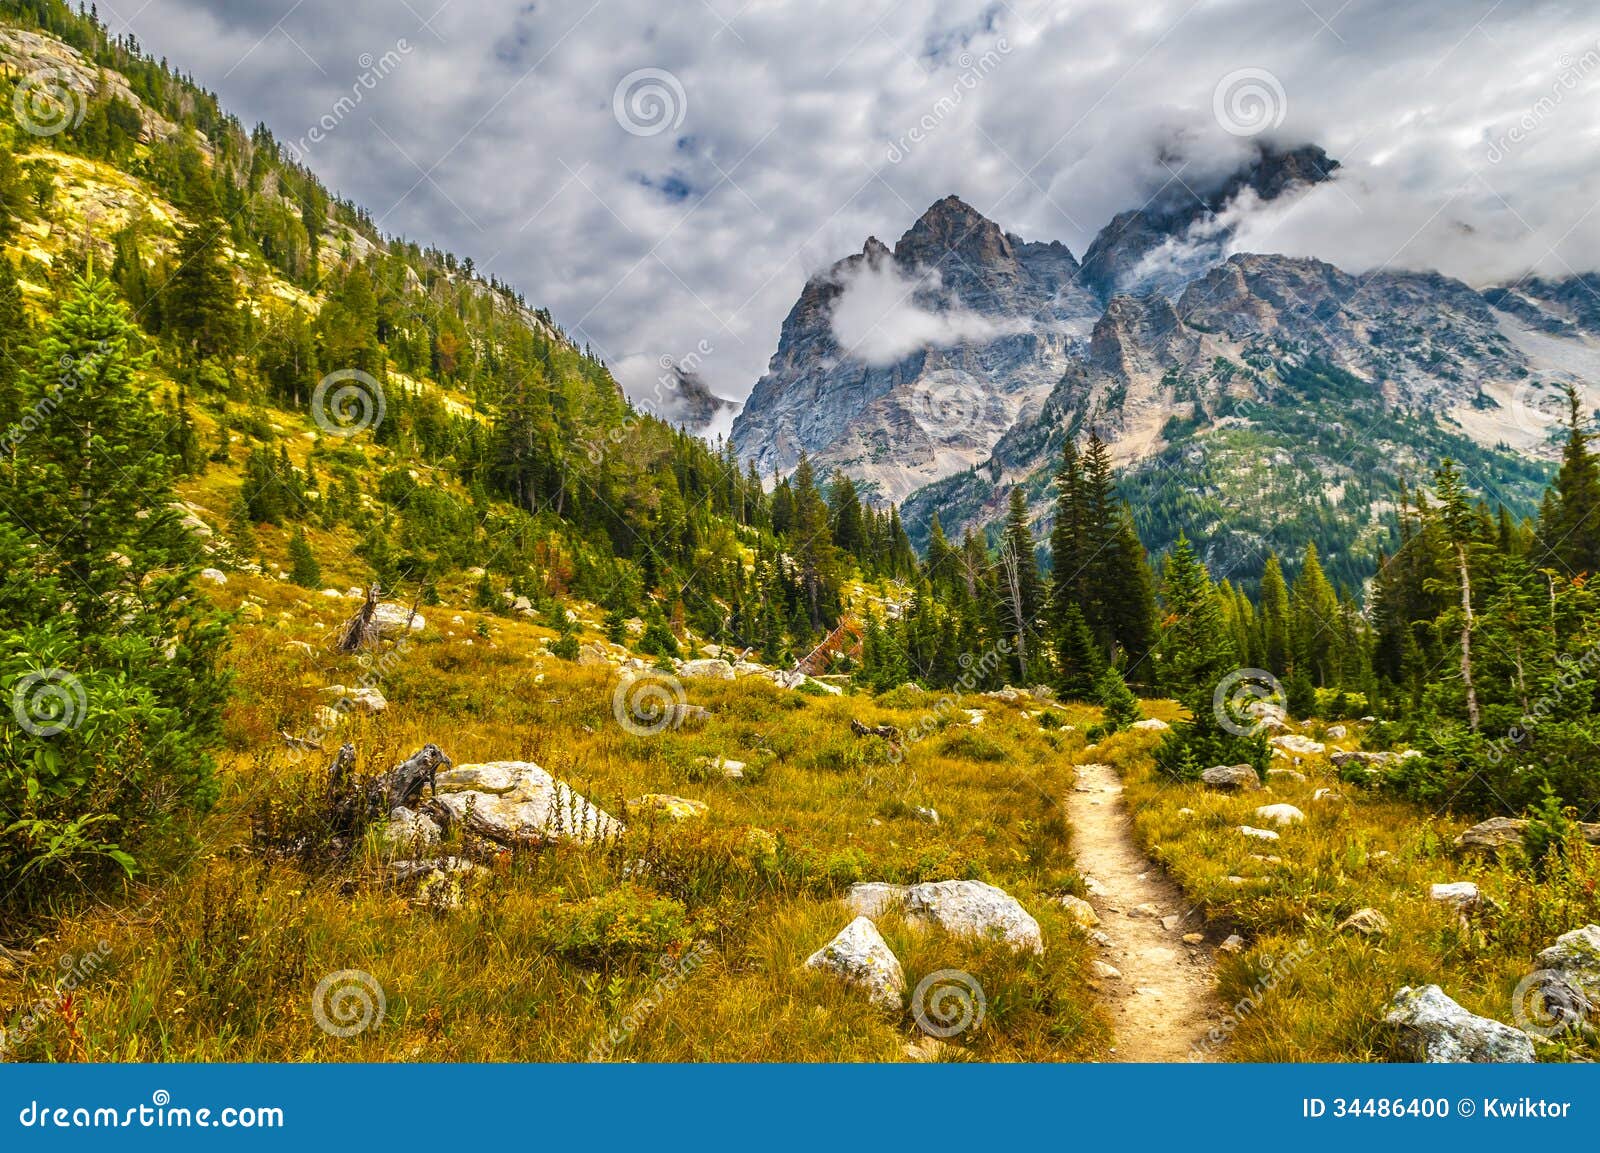 hiking trail in the cascade canyon - grand teton national park